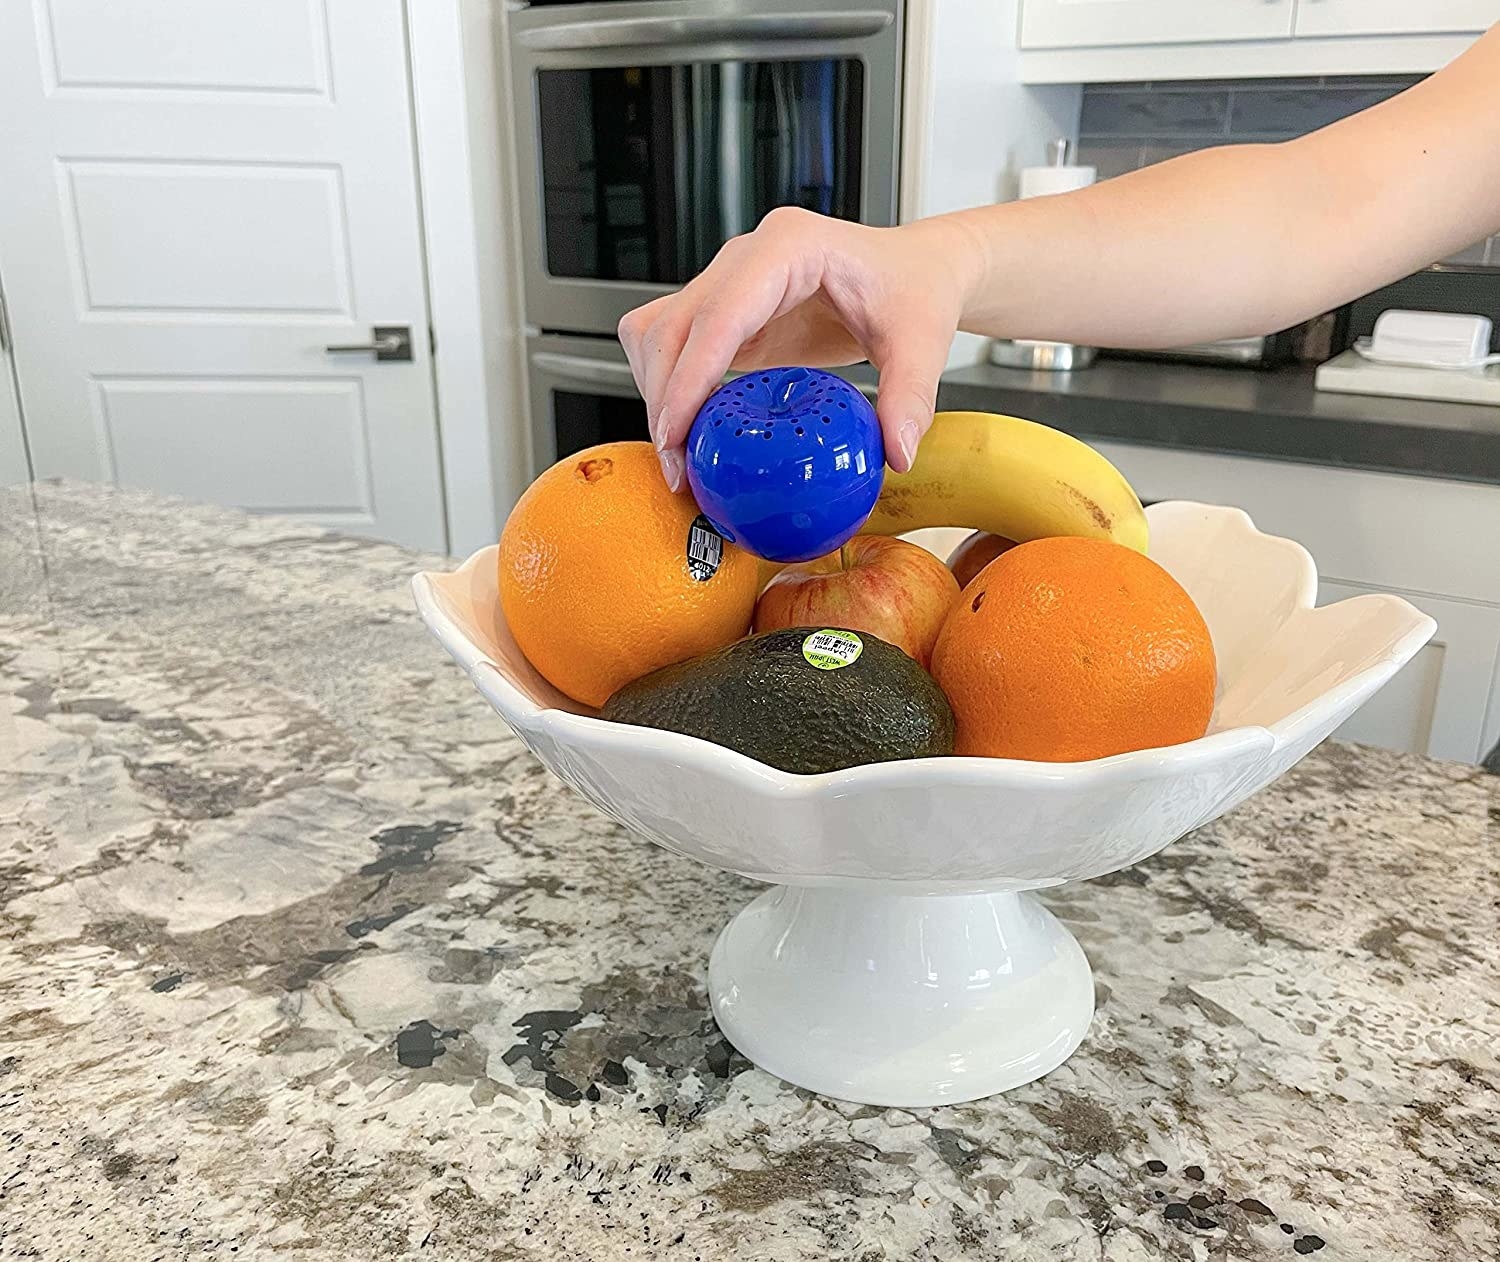 person placing the bluapple into a bowl of fruit